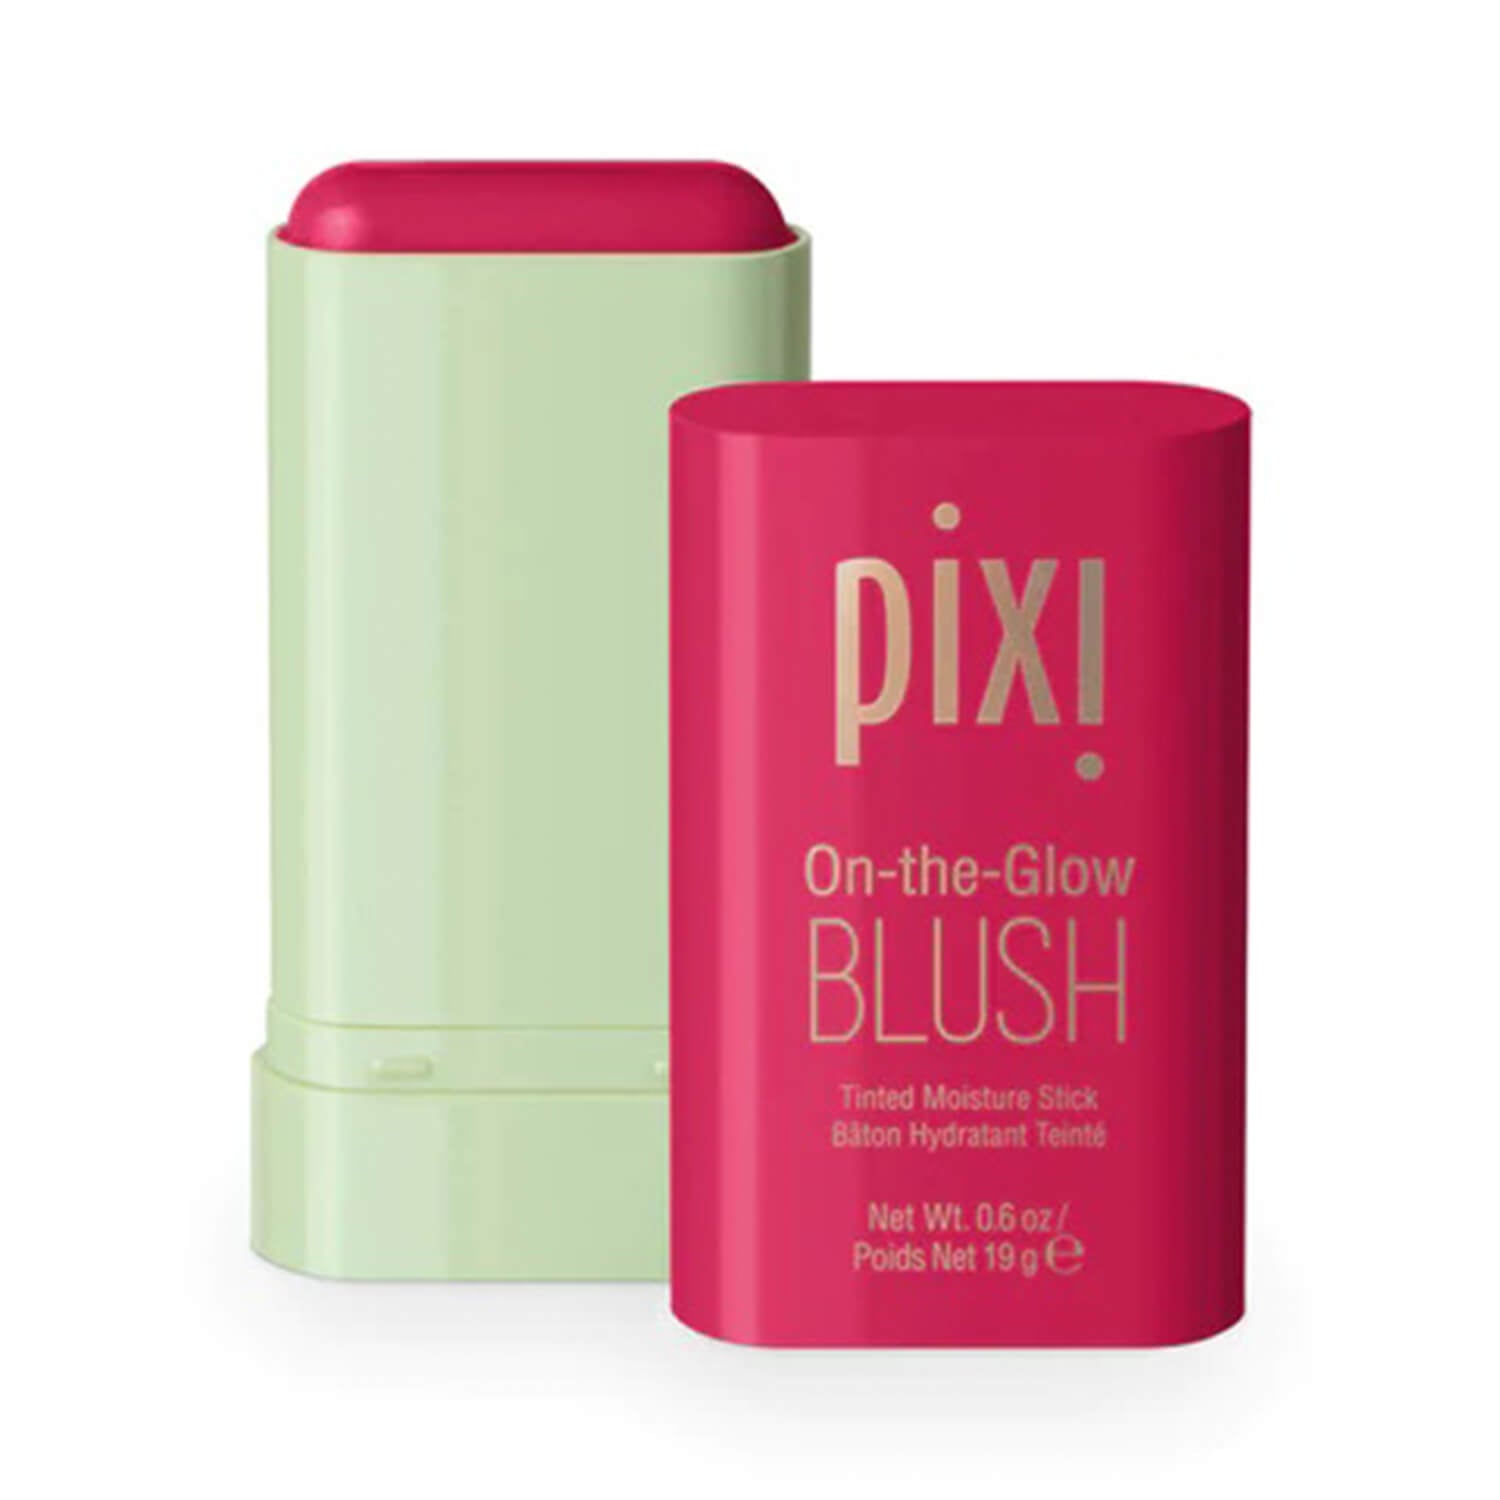 Shop Pixi On-the-Glow Blush in Ruby shade available at Heygirl.pk for delivery in Pakistan. 